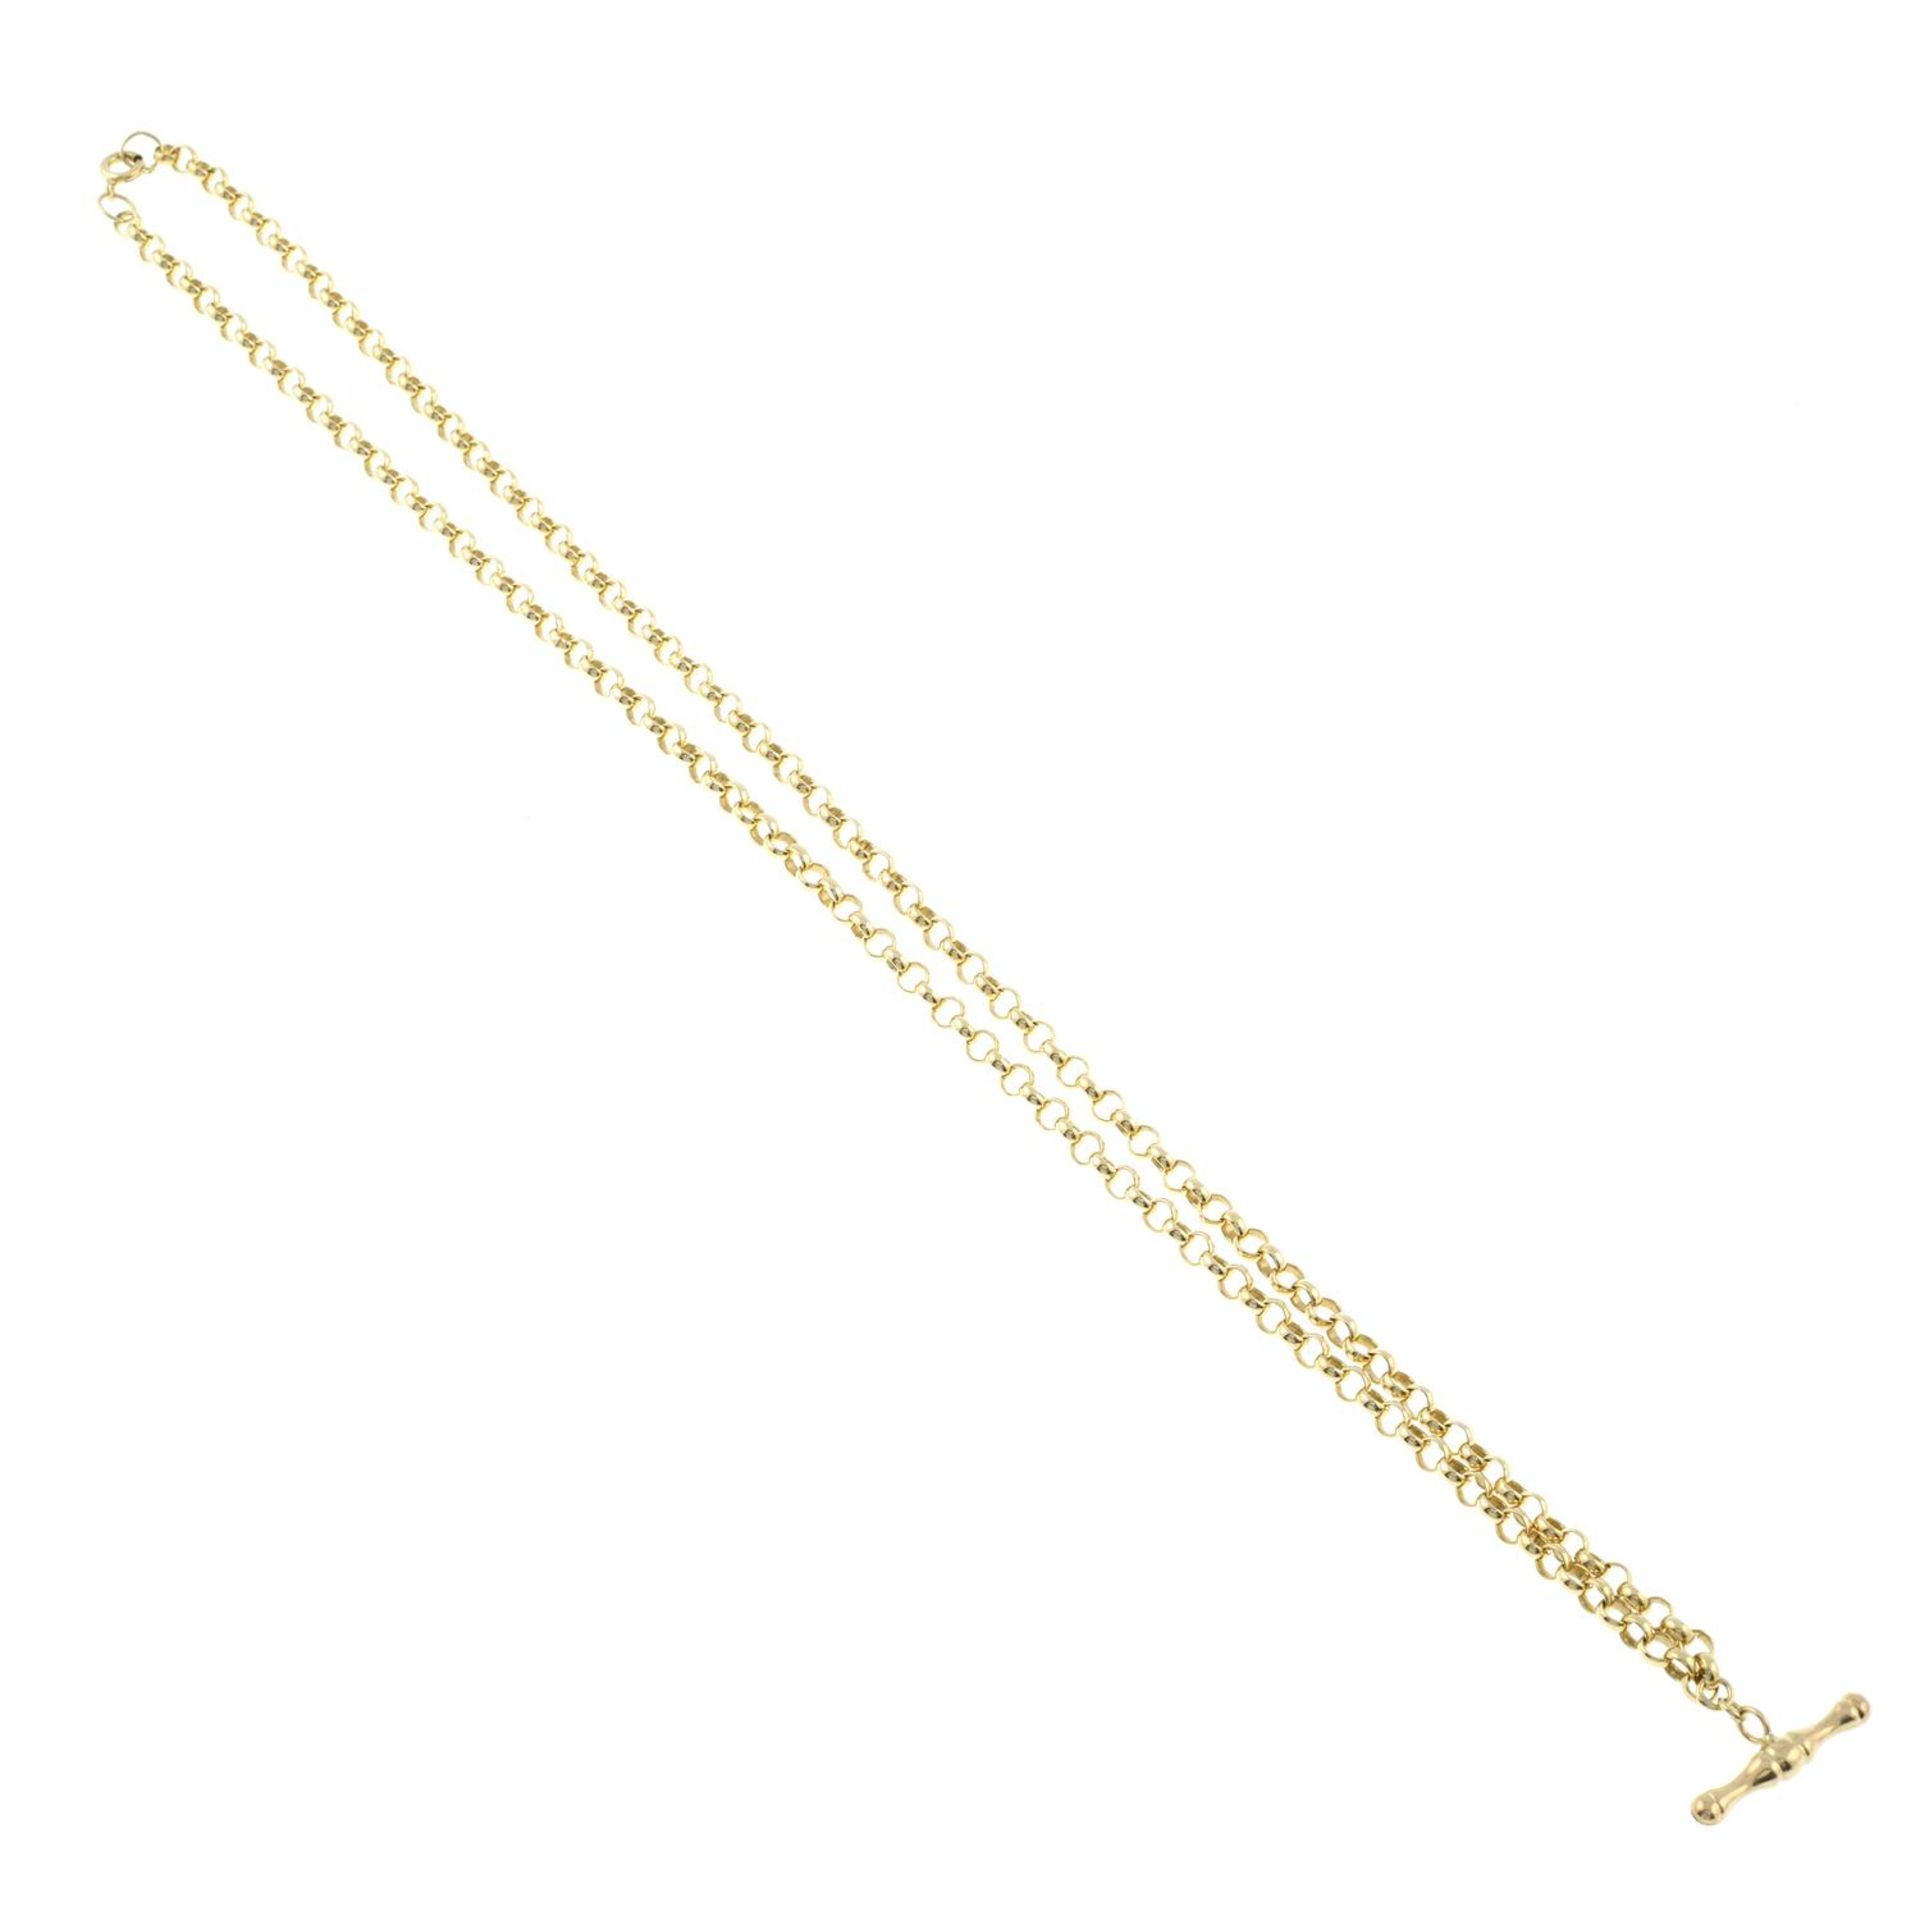 A 9ct gold T-bar pendant, with belcher-link necklace.